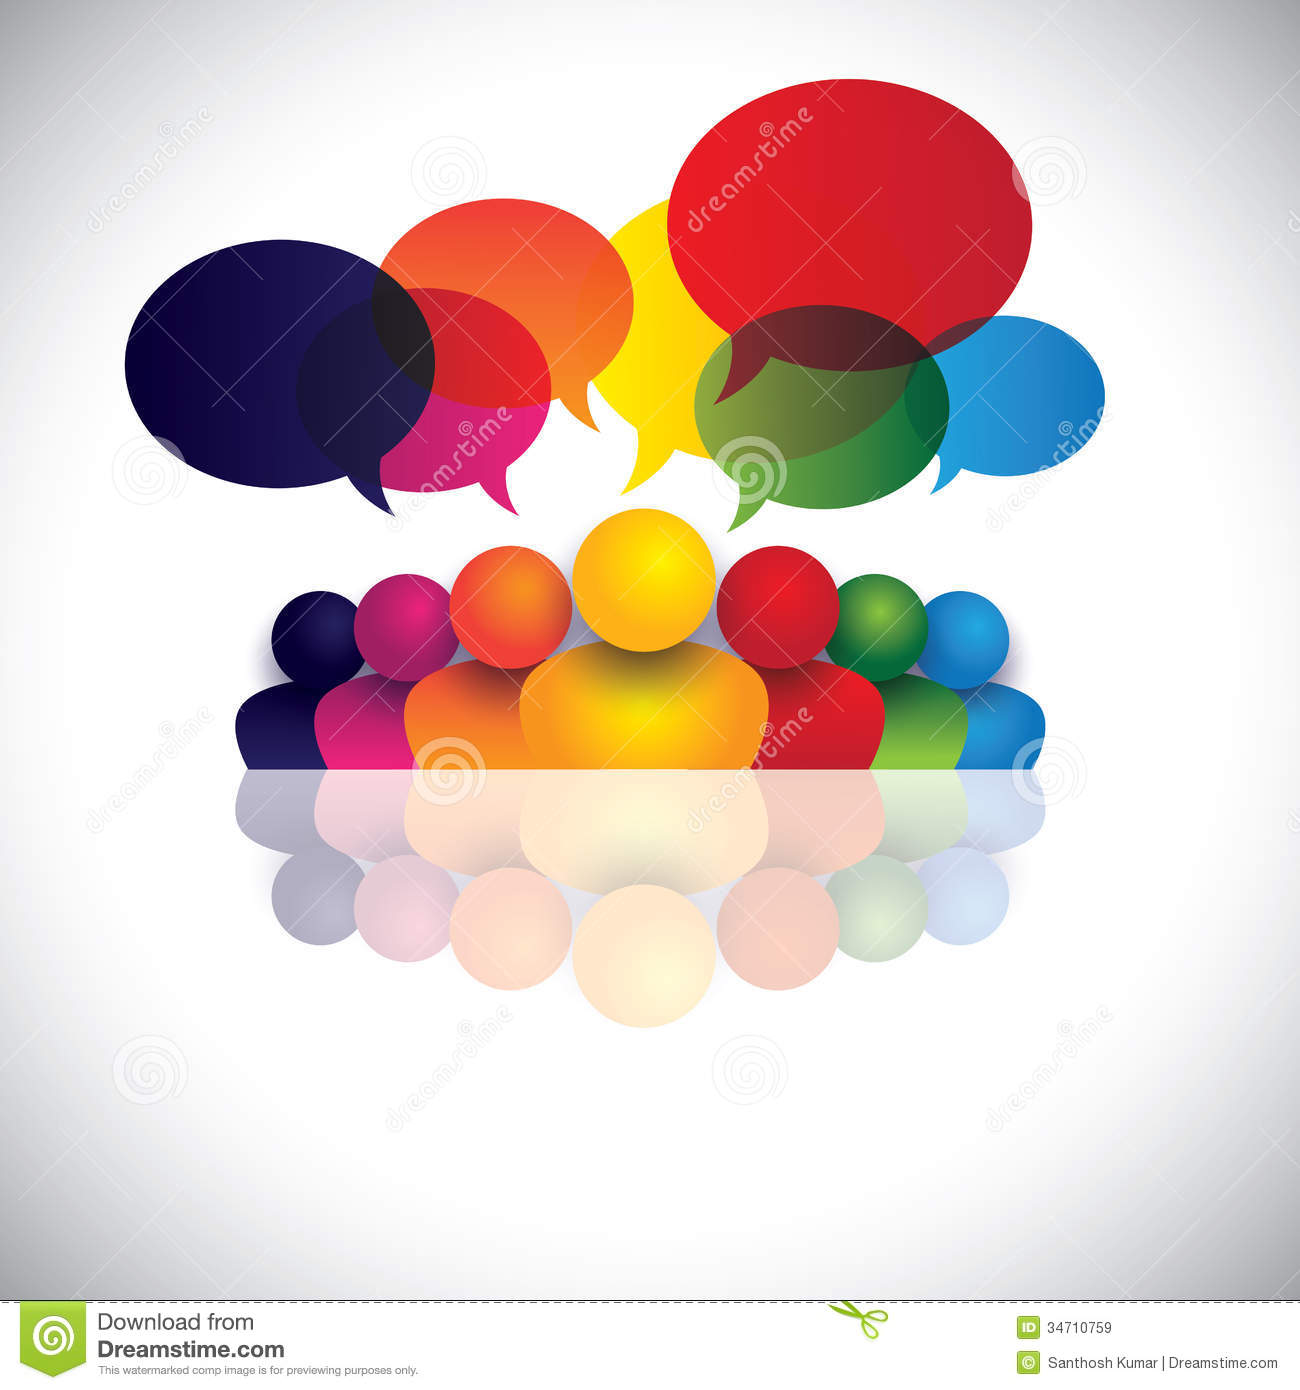 Social Media Communication Or Office Staff Meeting Royalty Free Stock